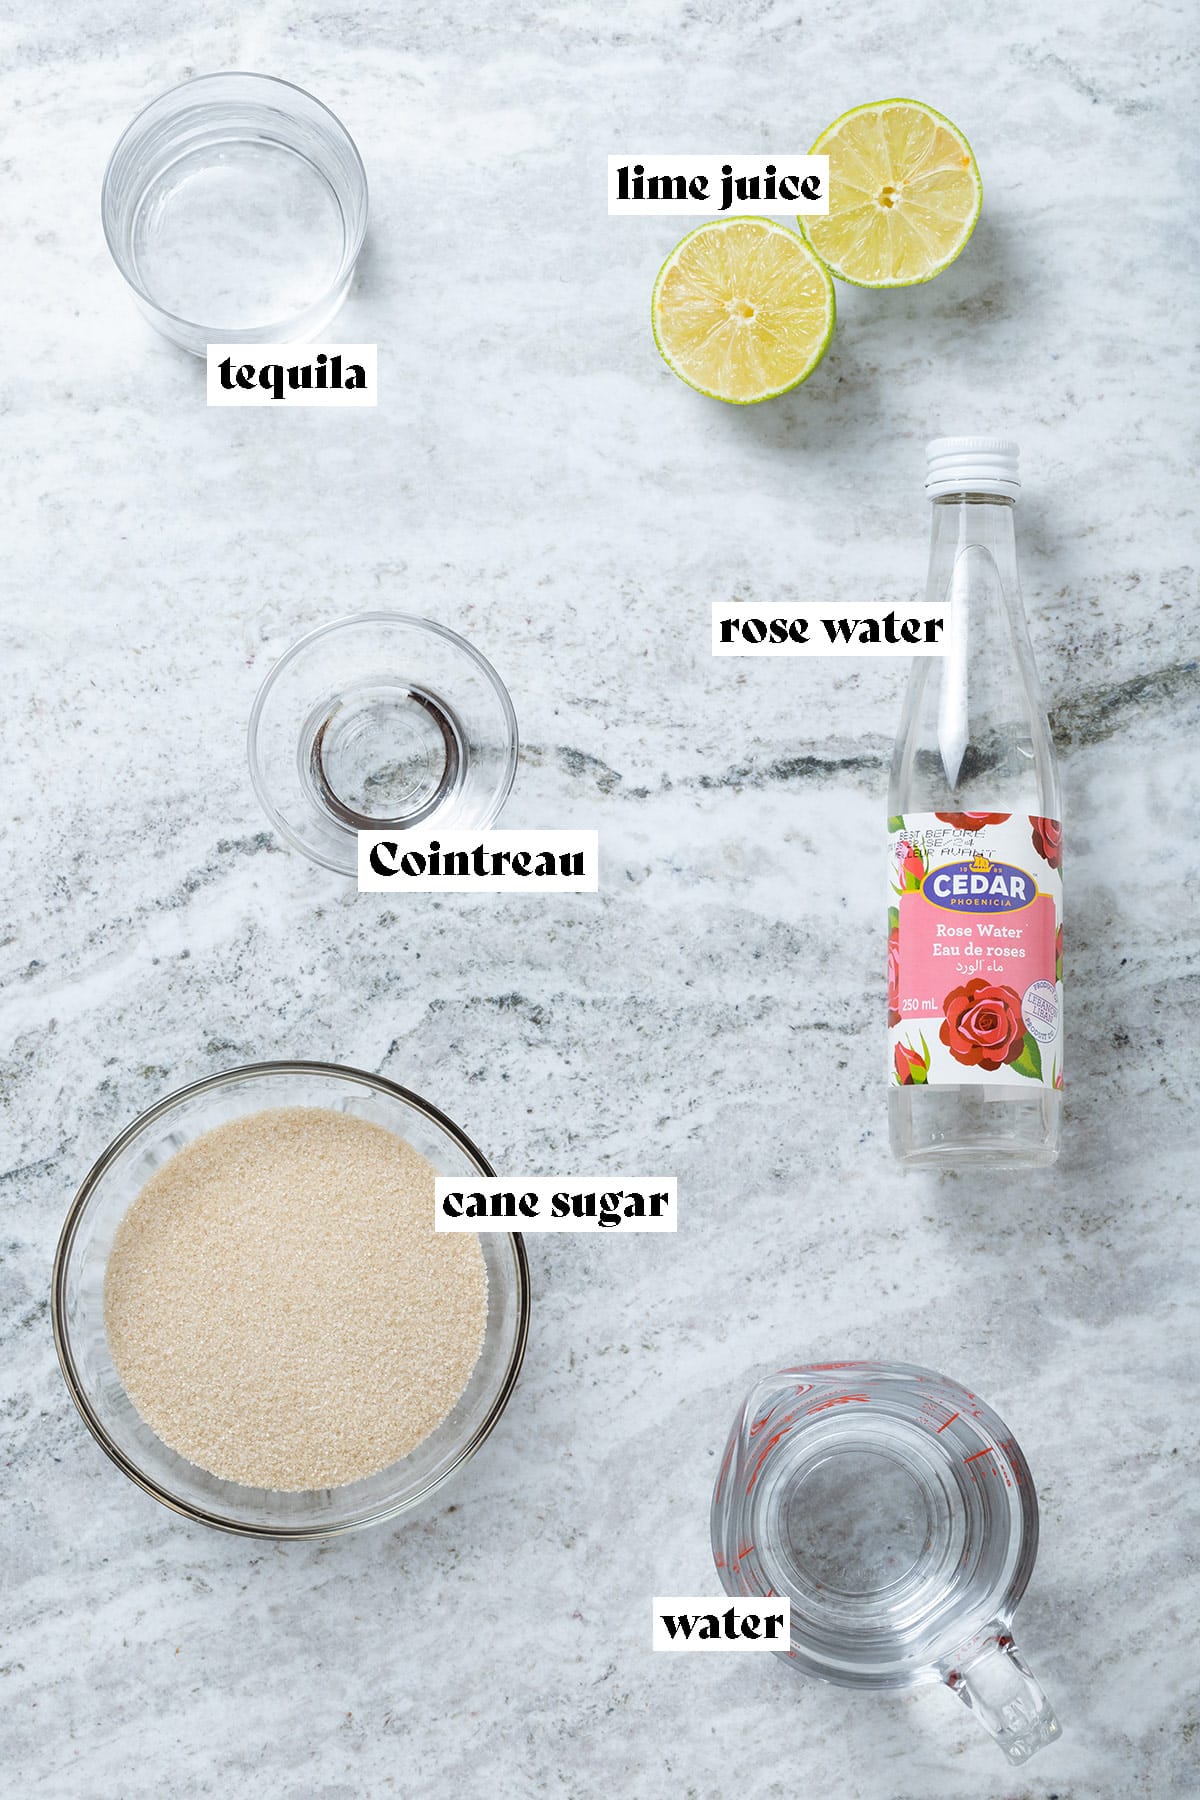 Cane sugar, rose water, cane sugar, water, lime, tequila, and Cointreau all measured and laid out with text overlay.